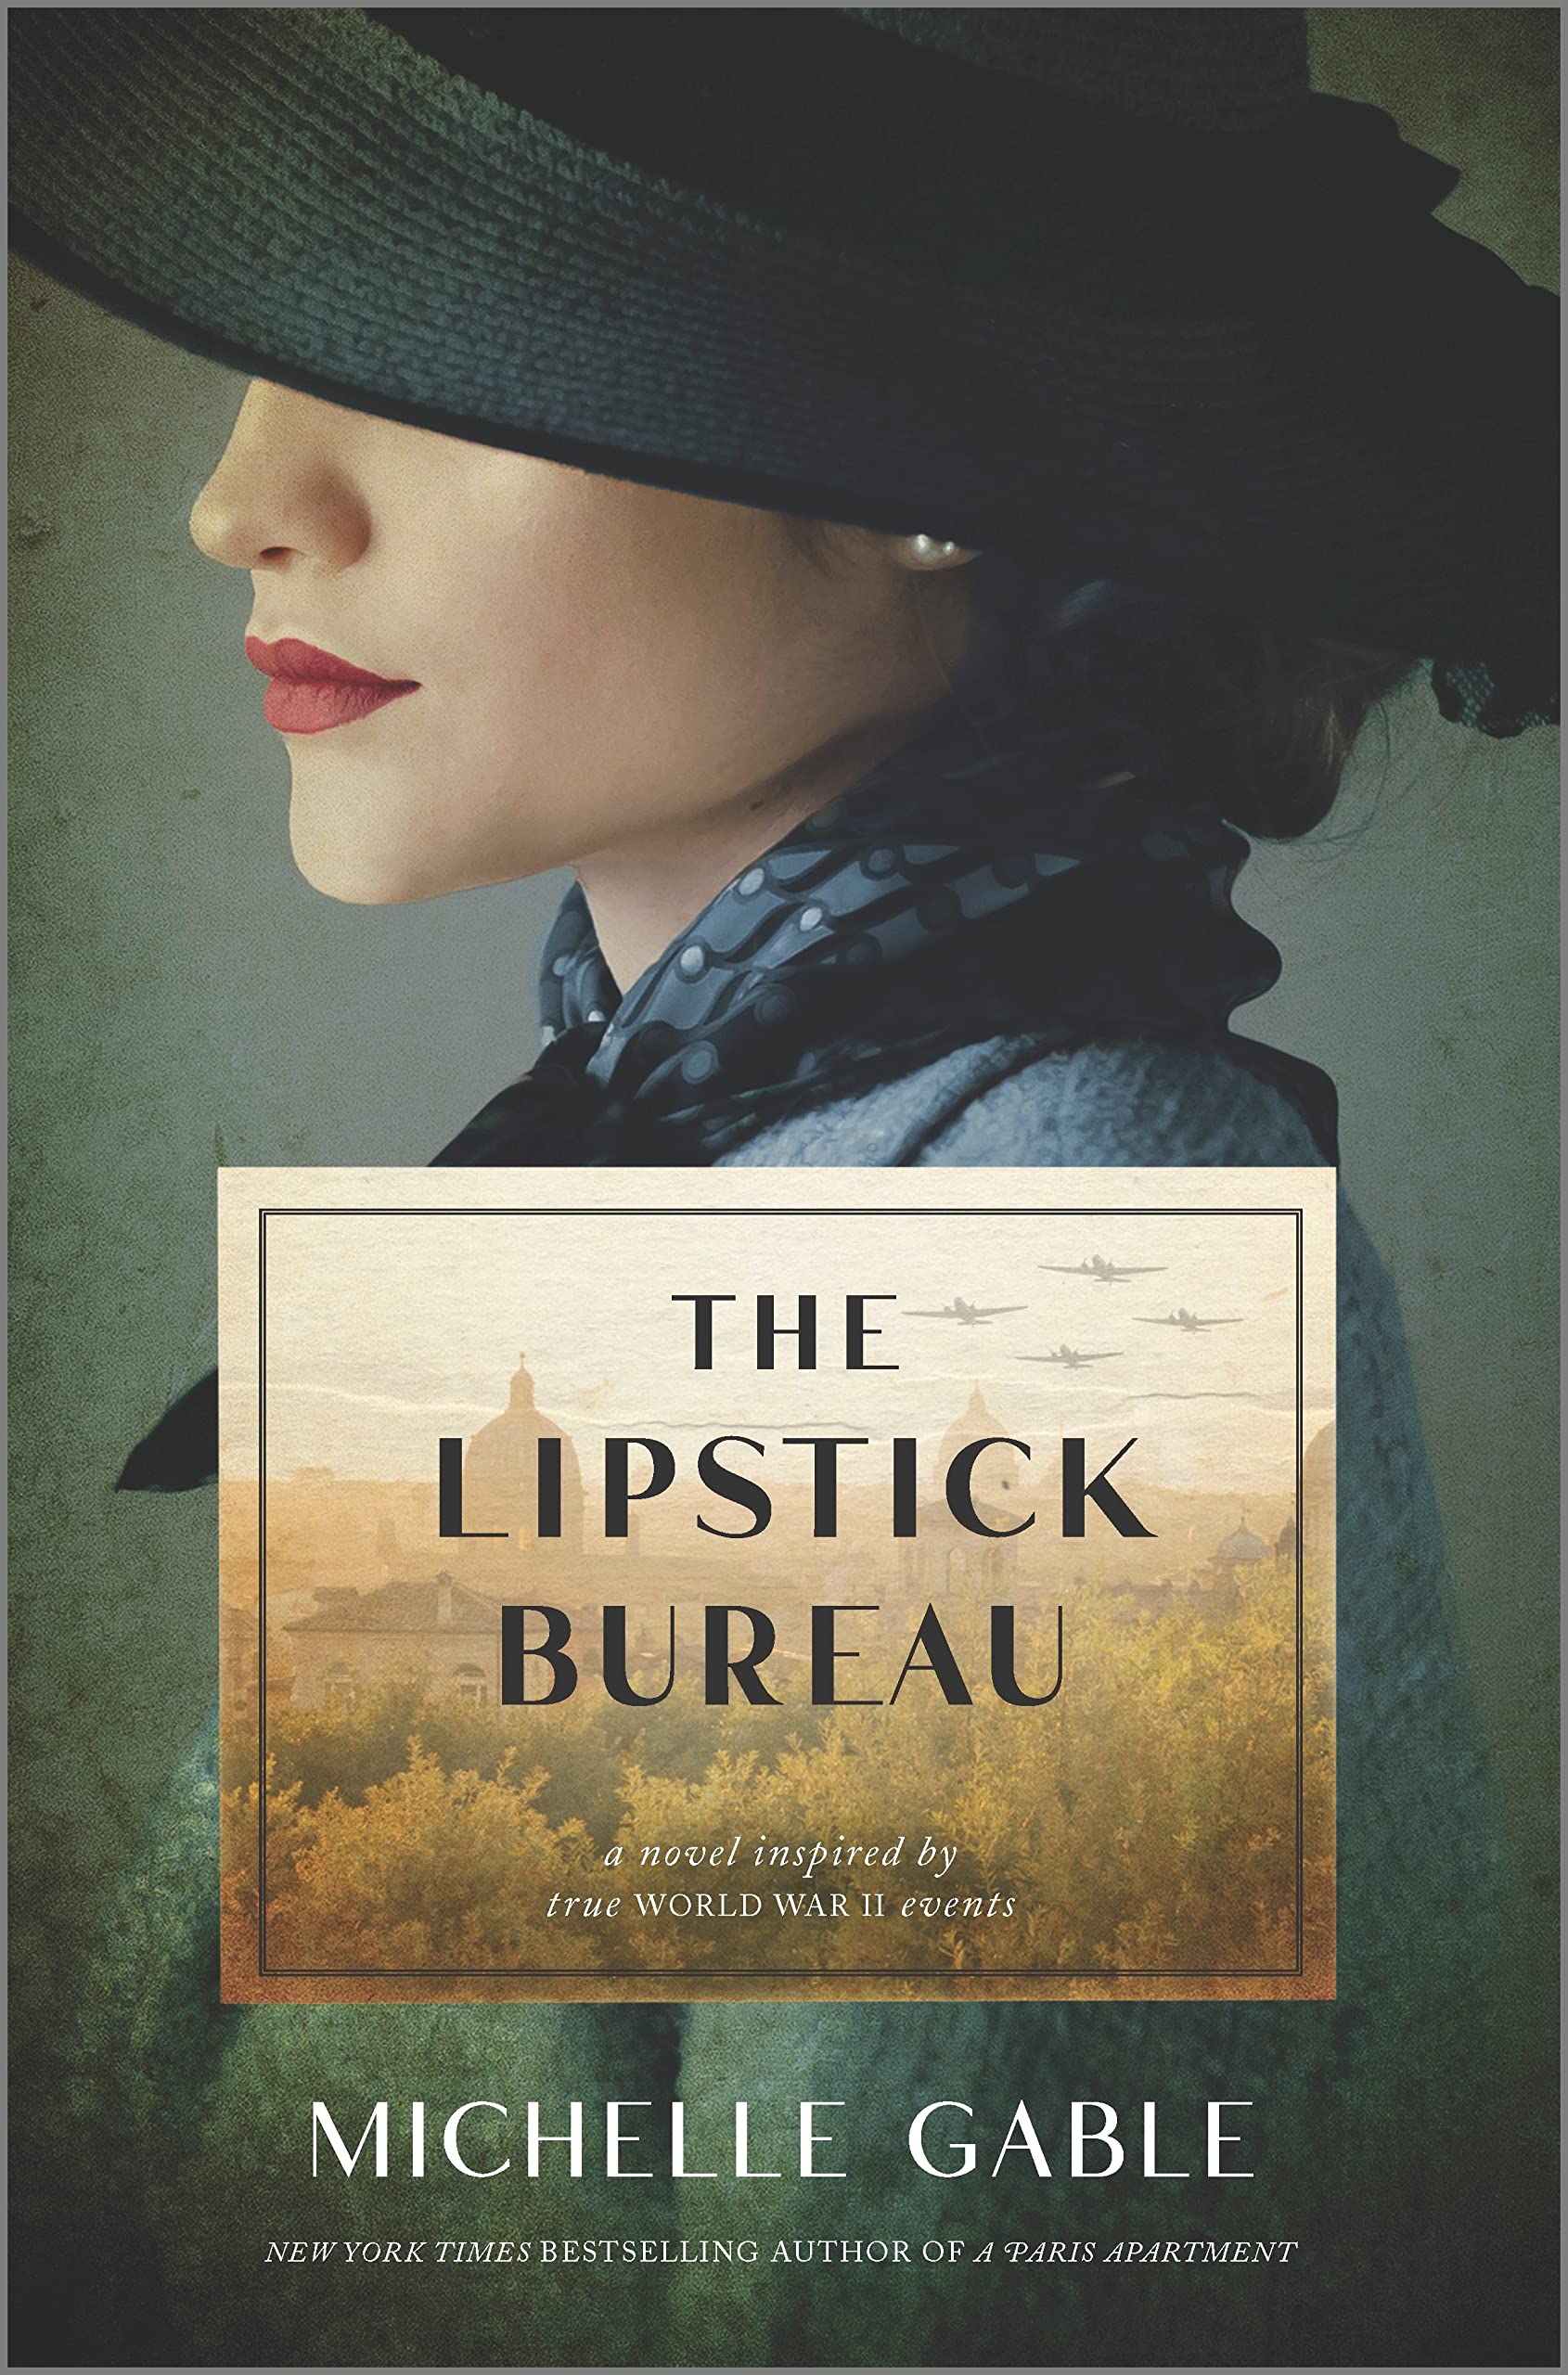 Image for "The Lipstick Bureau: A Novel Inspired by a Real-Life Female Spy"